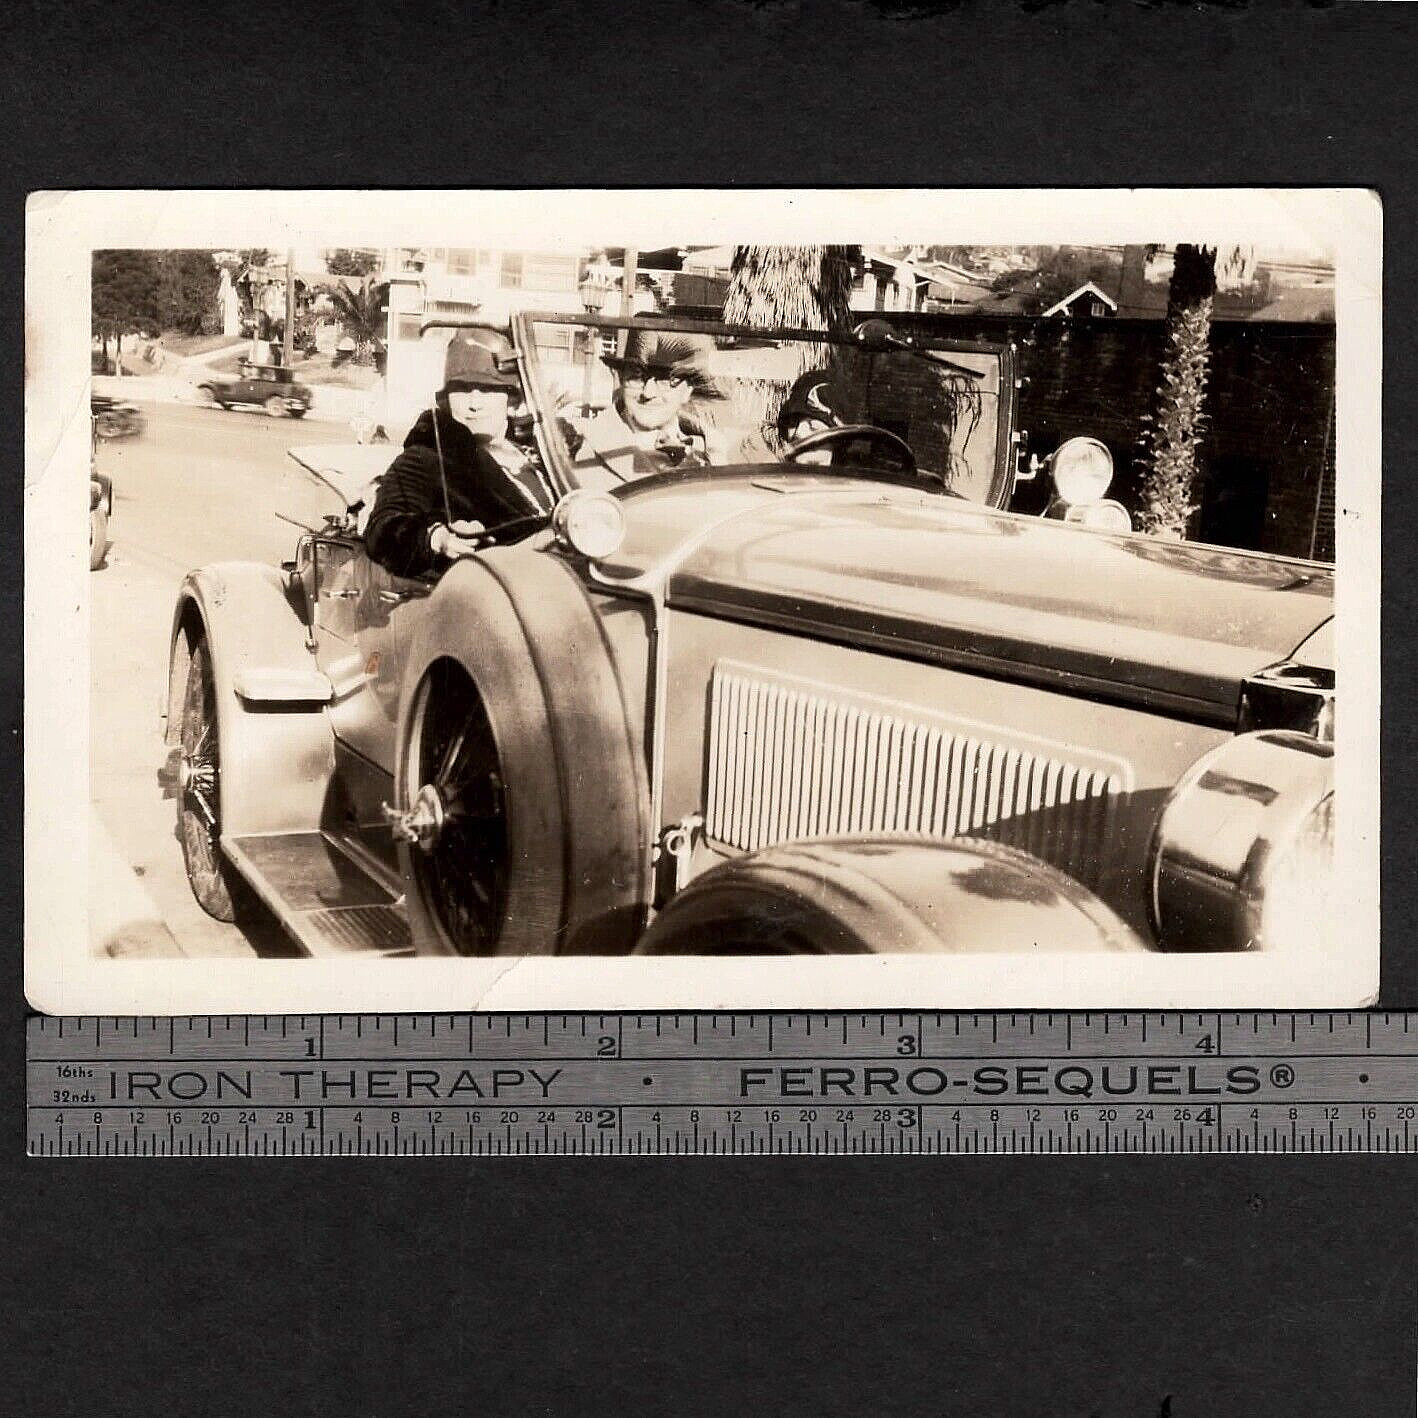 CarSpotter: 1920s Packard Wire Wheel Roadster w 3 Folks: Vintage SNAPSHOT Photo